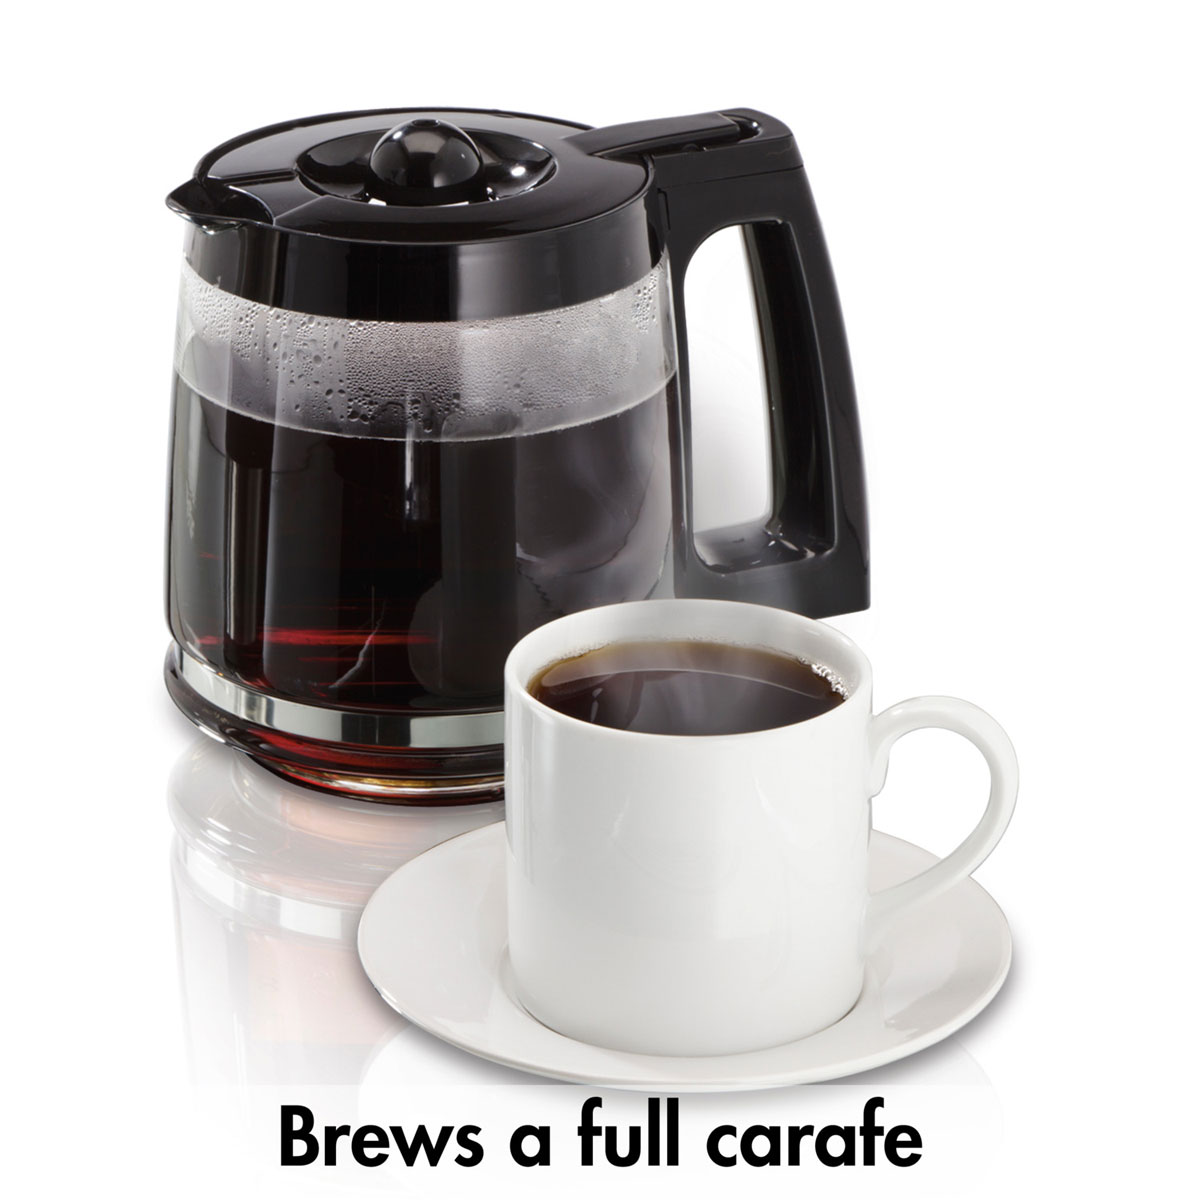 FlexBrew® 2-Way Coffee Maker with 12-Cup Carafe & Pod